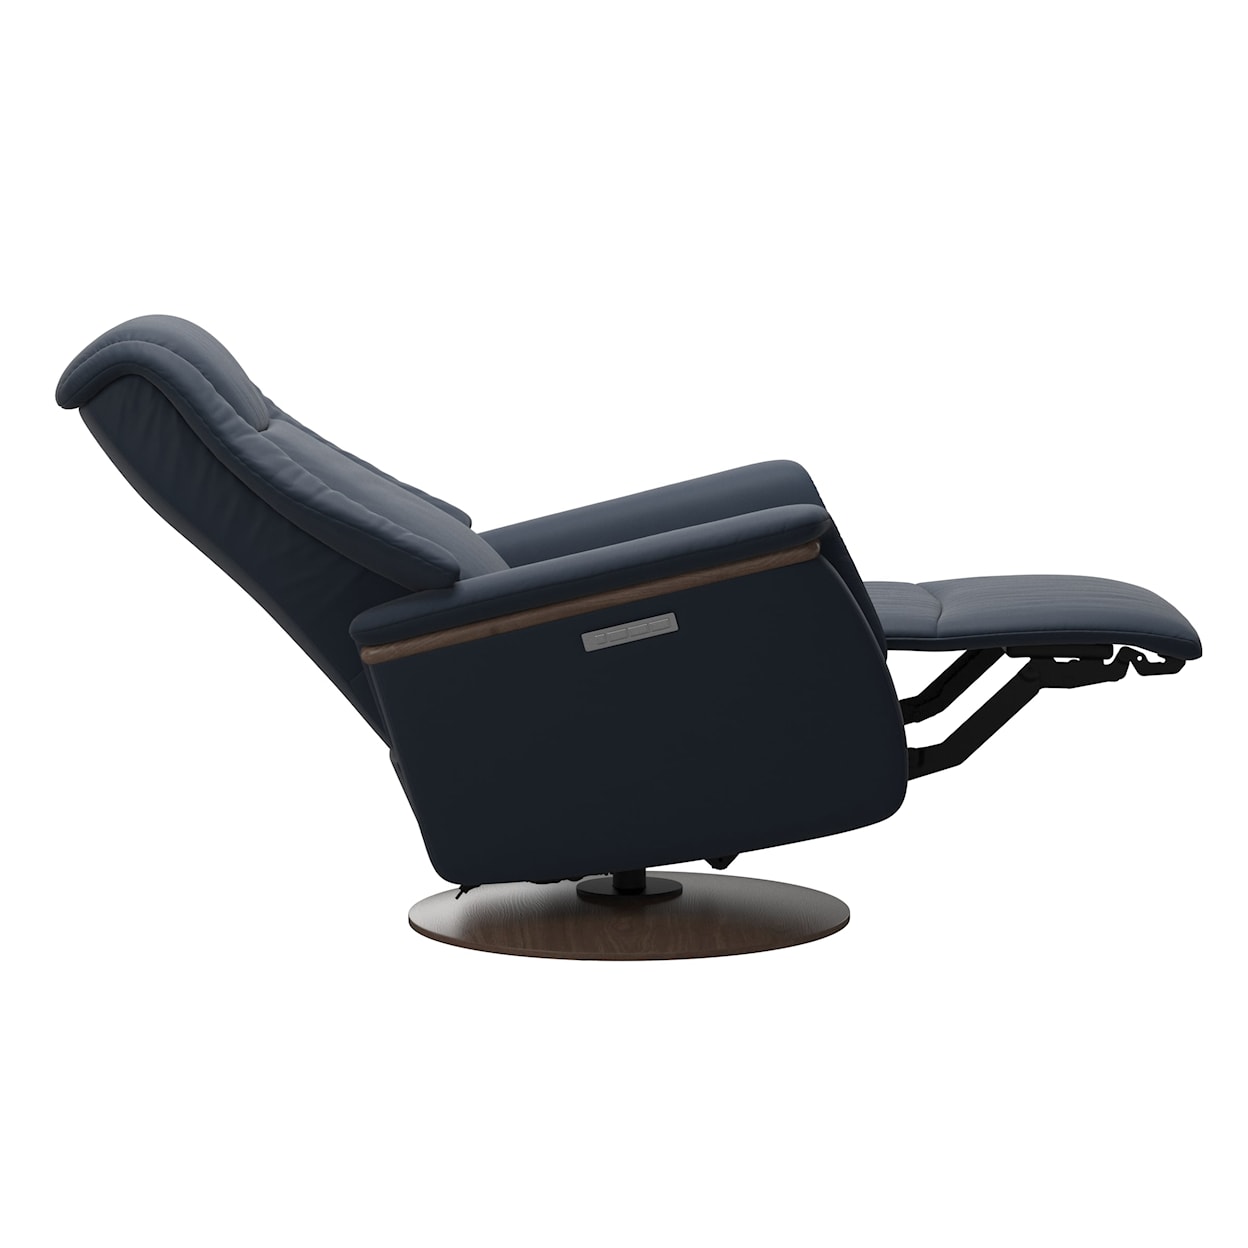 Stressless by Ekornes Max- Large Power Recliner